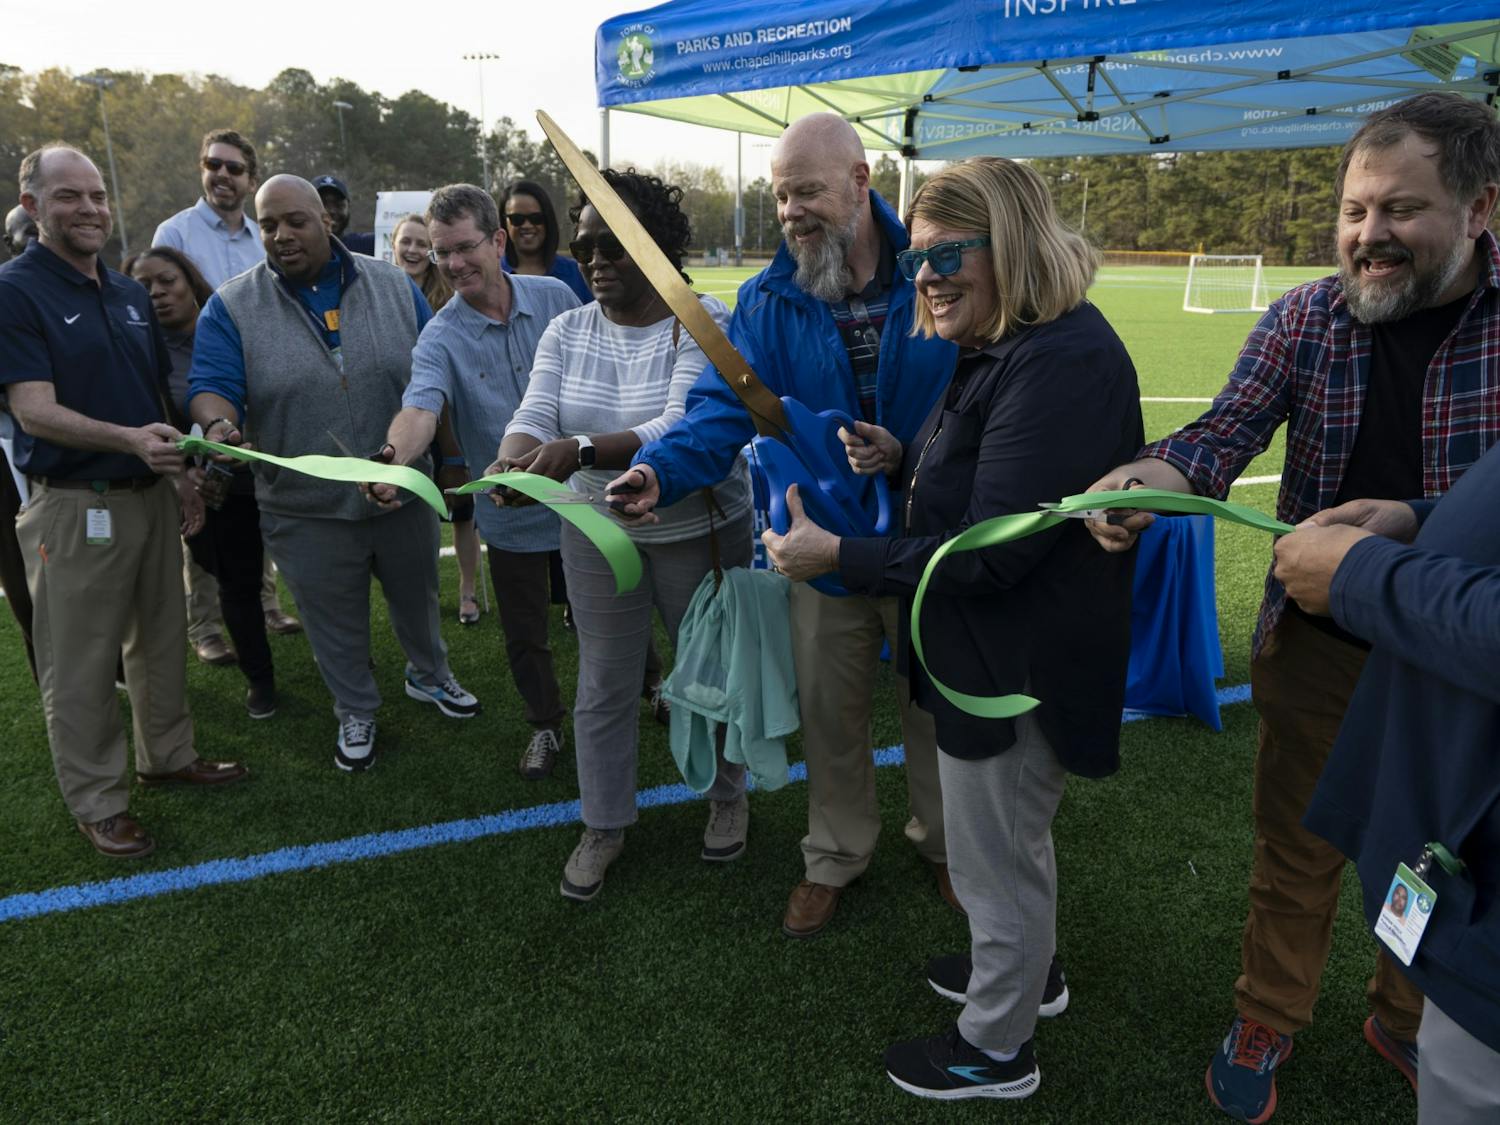 Chapel Hill Town Mayor Pam Hemminger and other representatives cut the ribbon at the ceremony on Thursday, Mar. 23, 2023, to celebrate Cedar Falls Park’s freshly-redone, environmentally-friendly turf for the multi-purpose field.